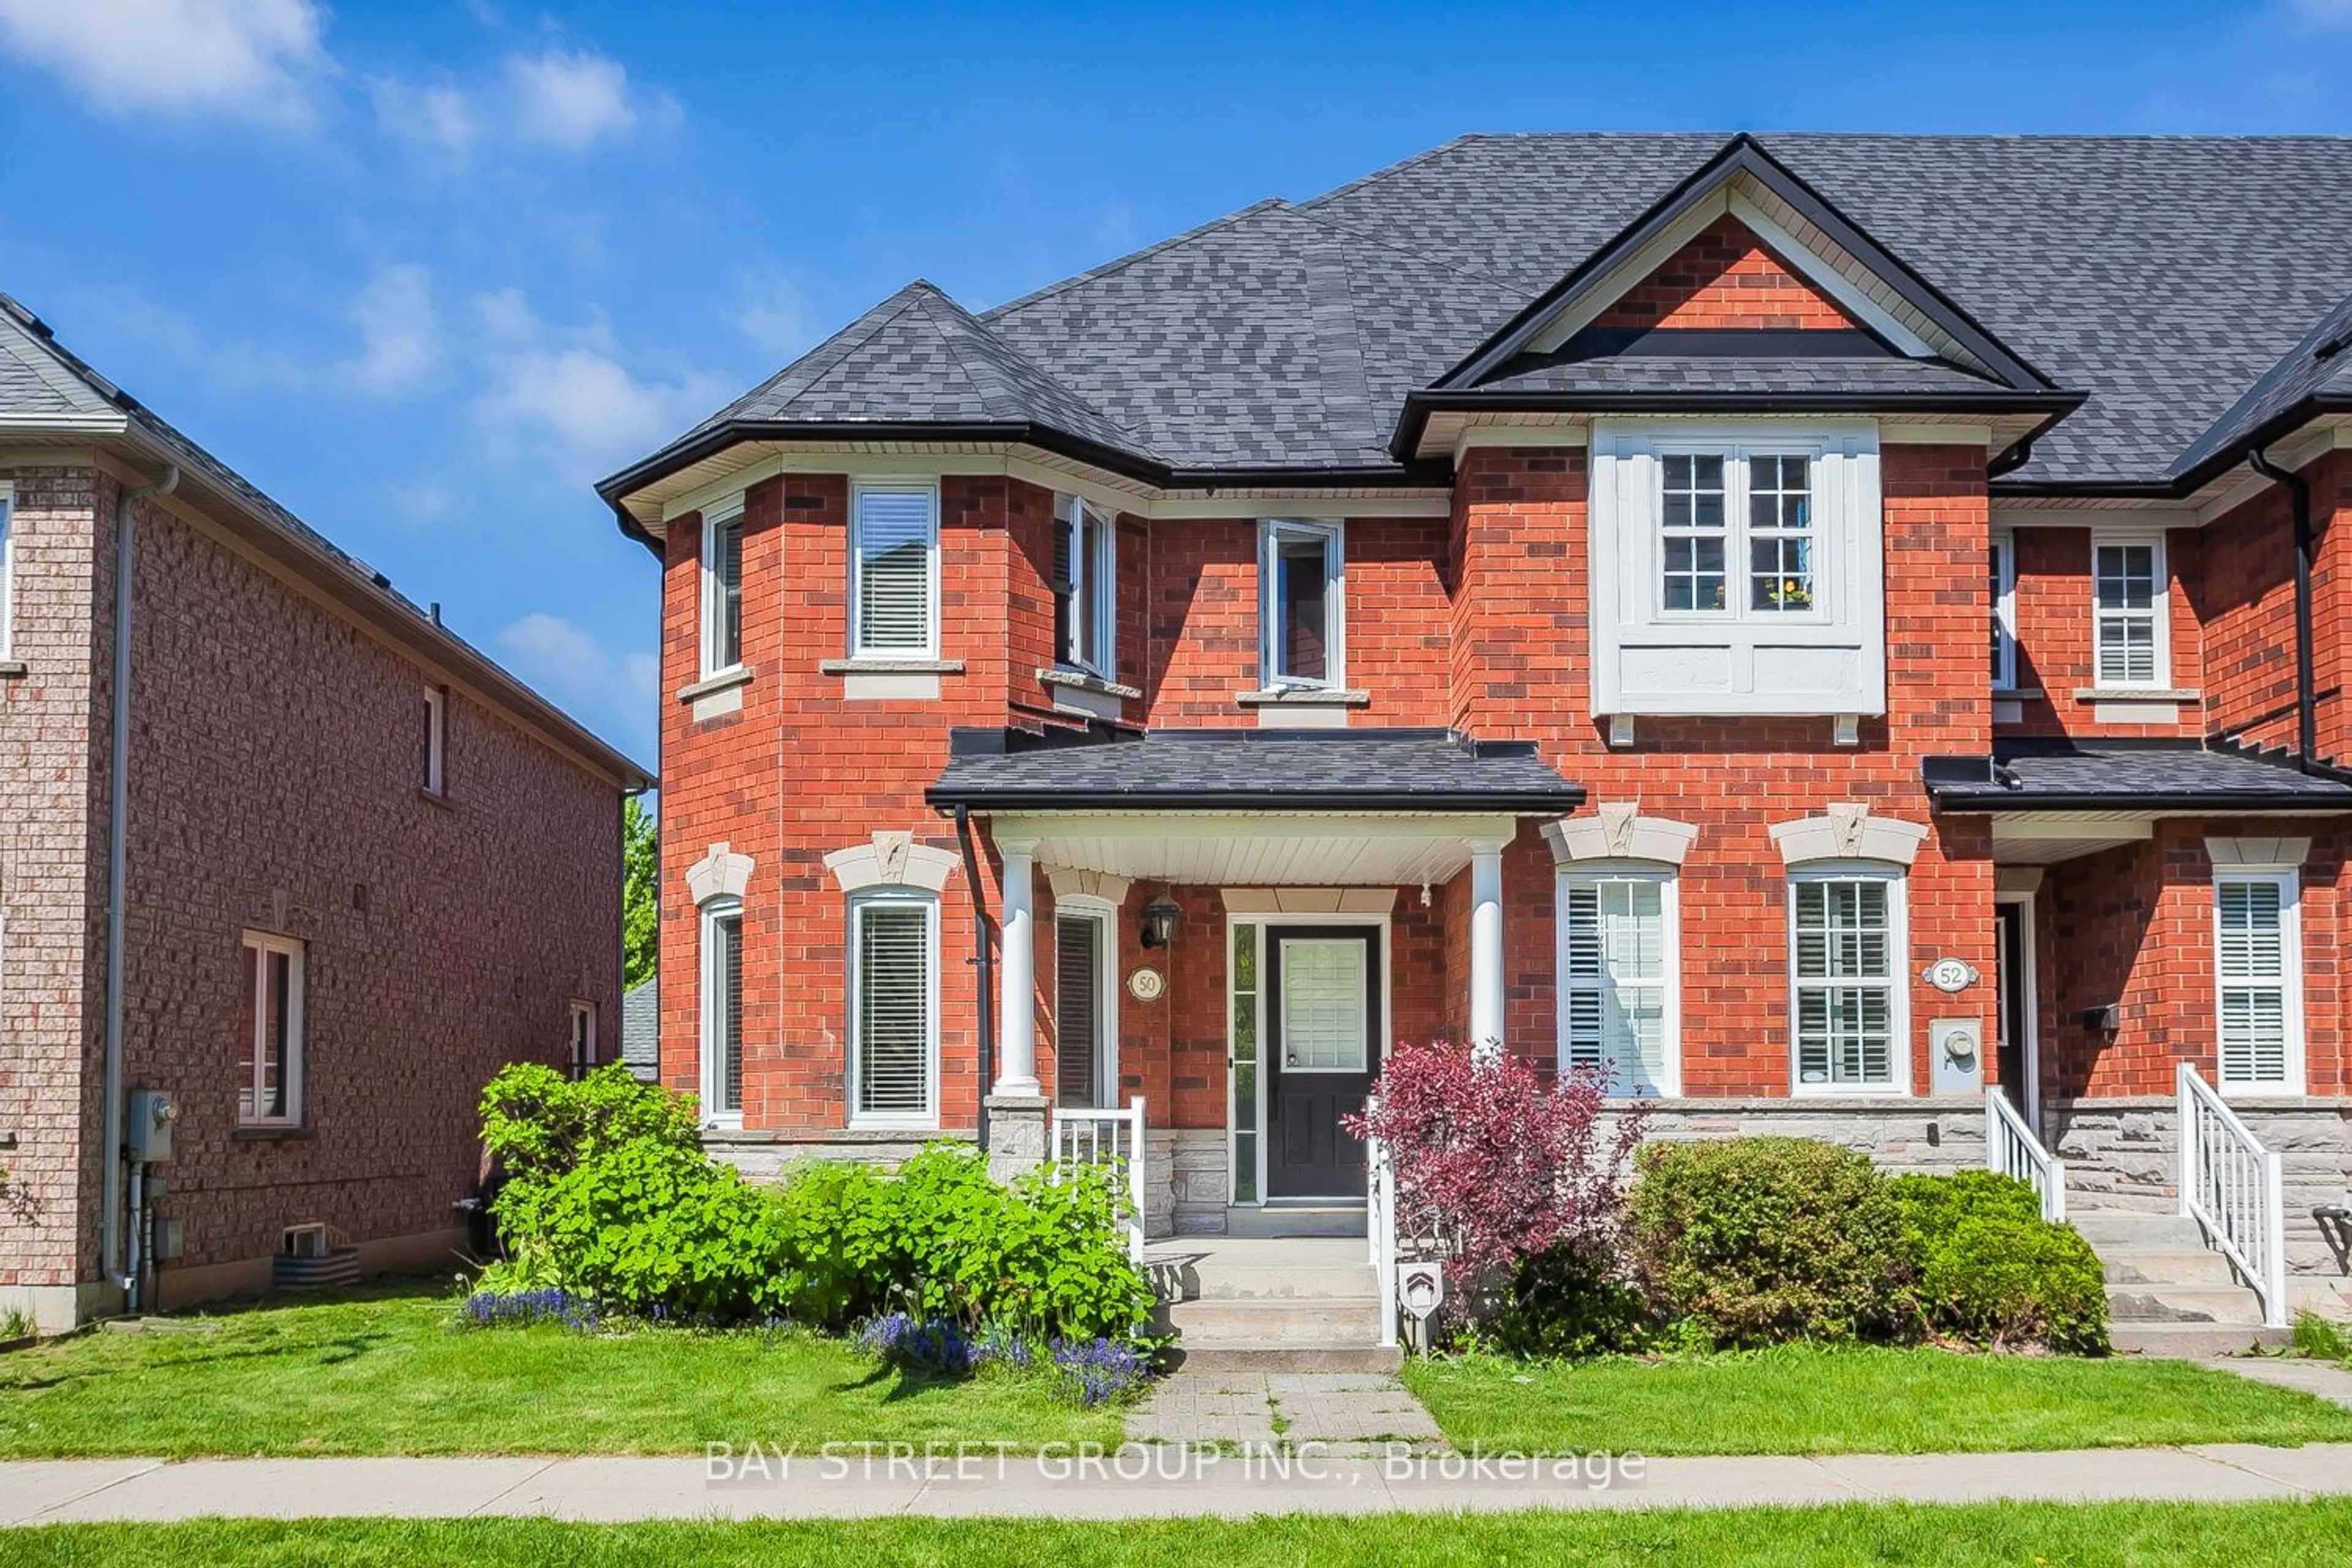 Home with brick exterior material for 50 Baffin Crt, Richmond Hill Ontario L4B 4J7